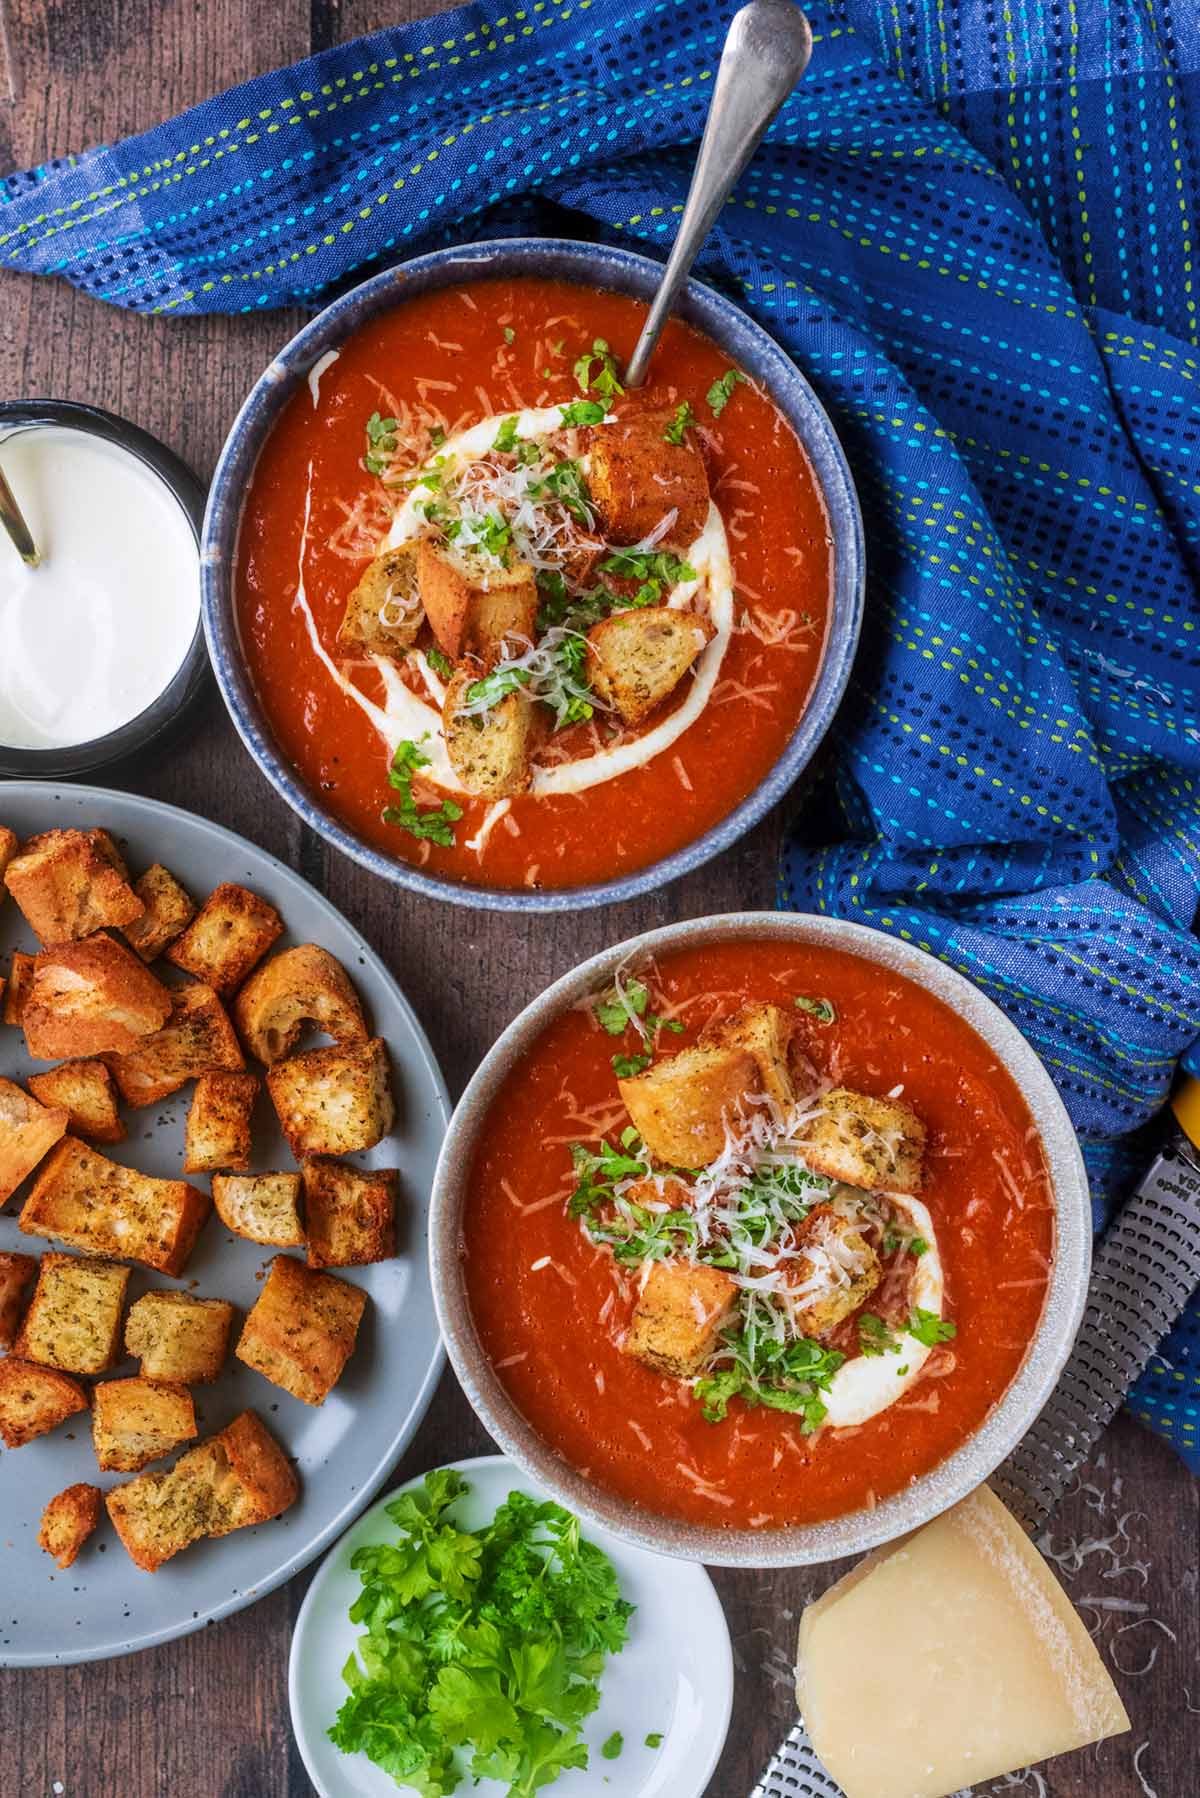 Two bowls of tomato soup next to a plate of croutons, some herbs, cheese and cream.